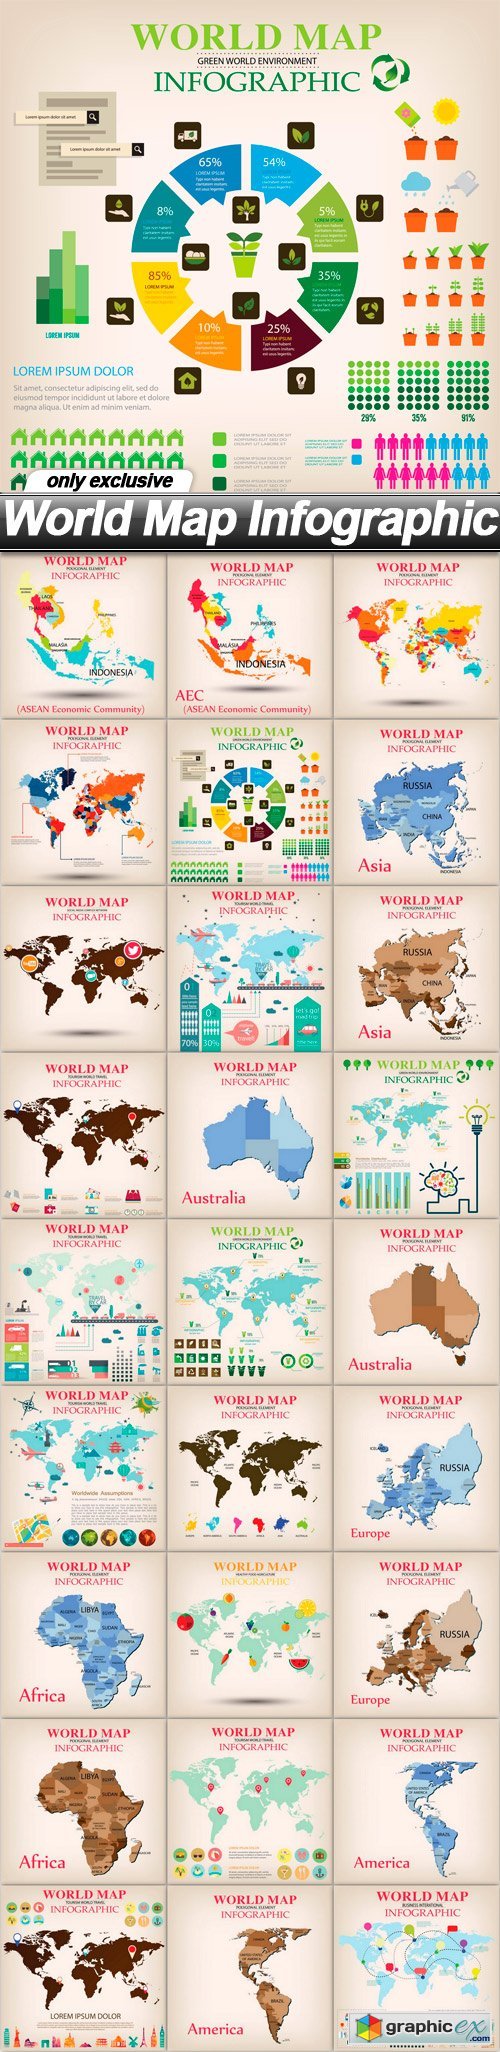 World Map Infographic - 27 EPS